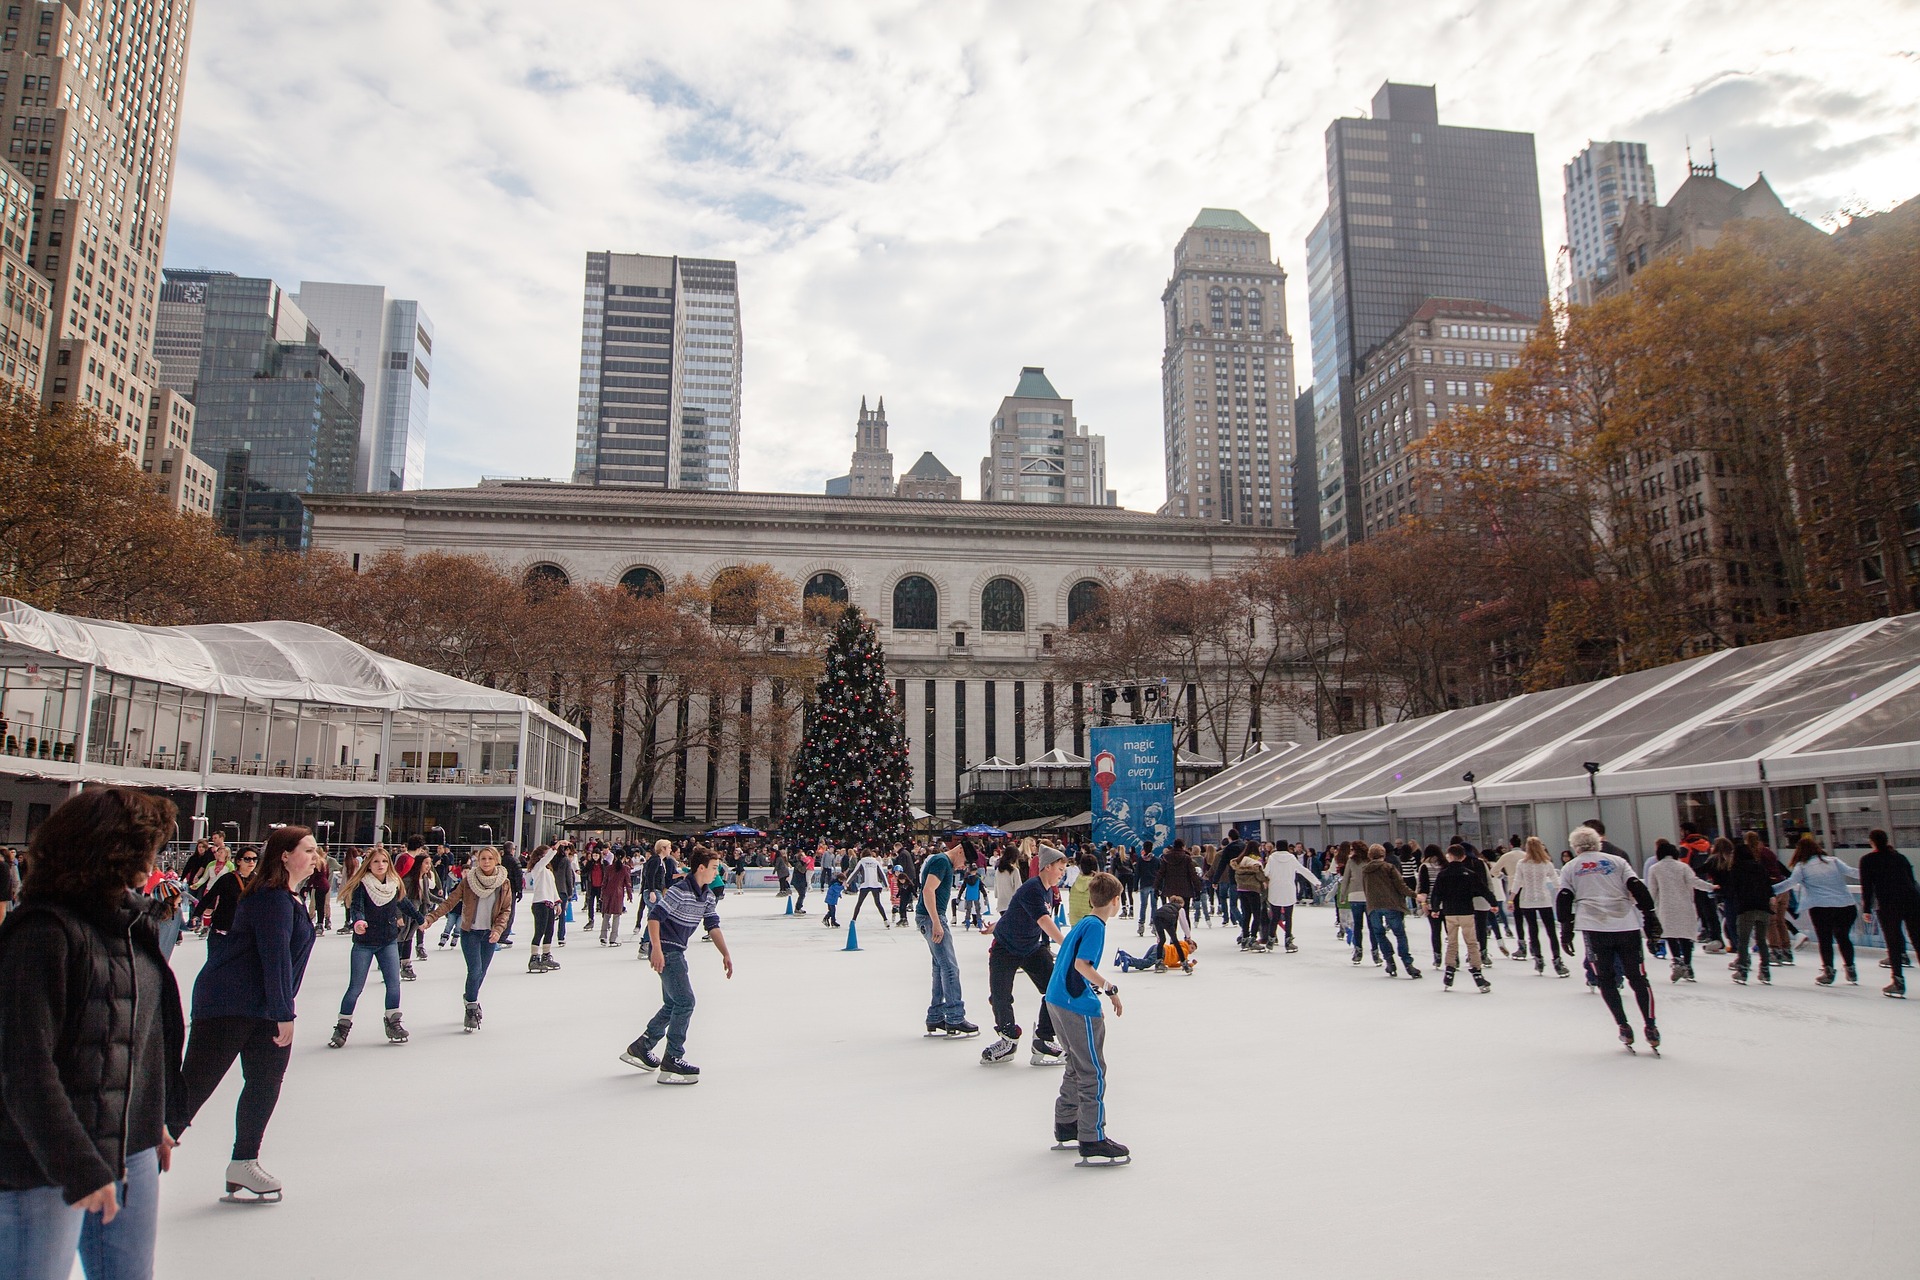 Winter Village at Bryant Park in New York City